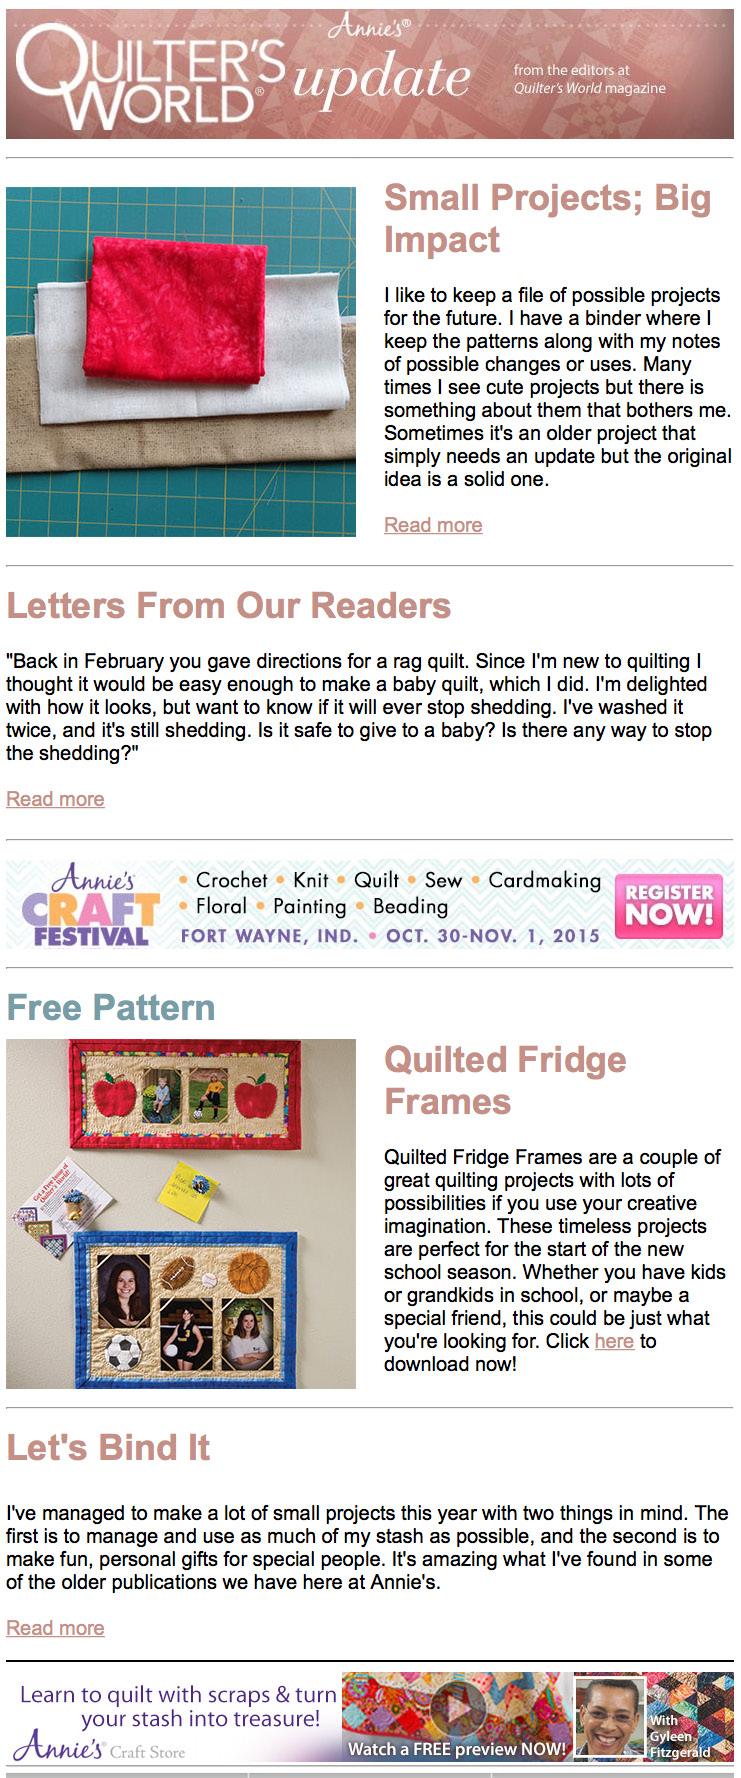 Free-Quilting.com 575,000+ monthly page views Hundreds of free sewing and quilting patterns Free-Sewing.